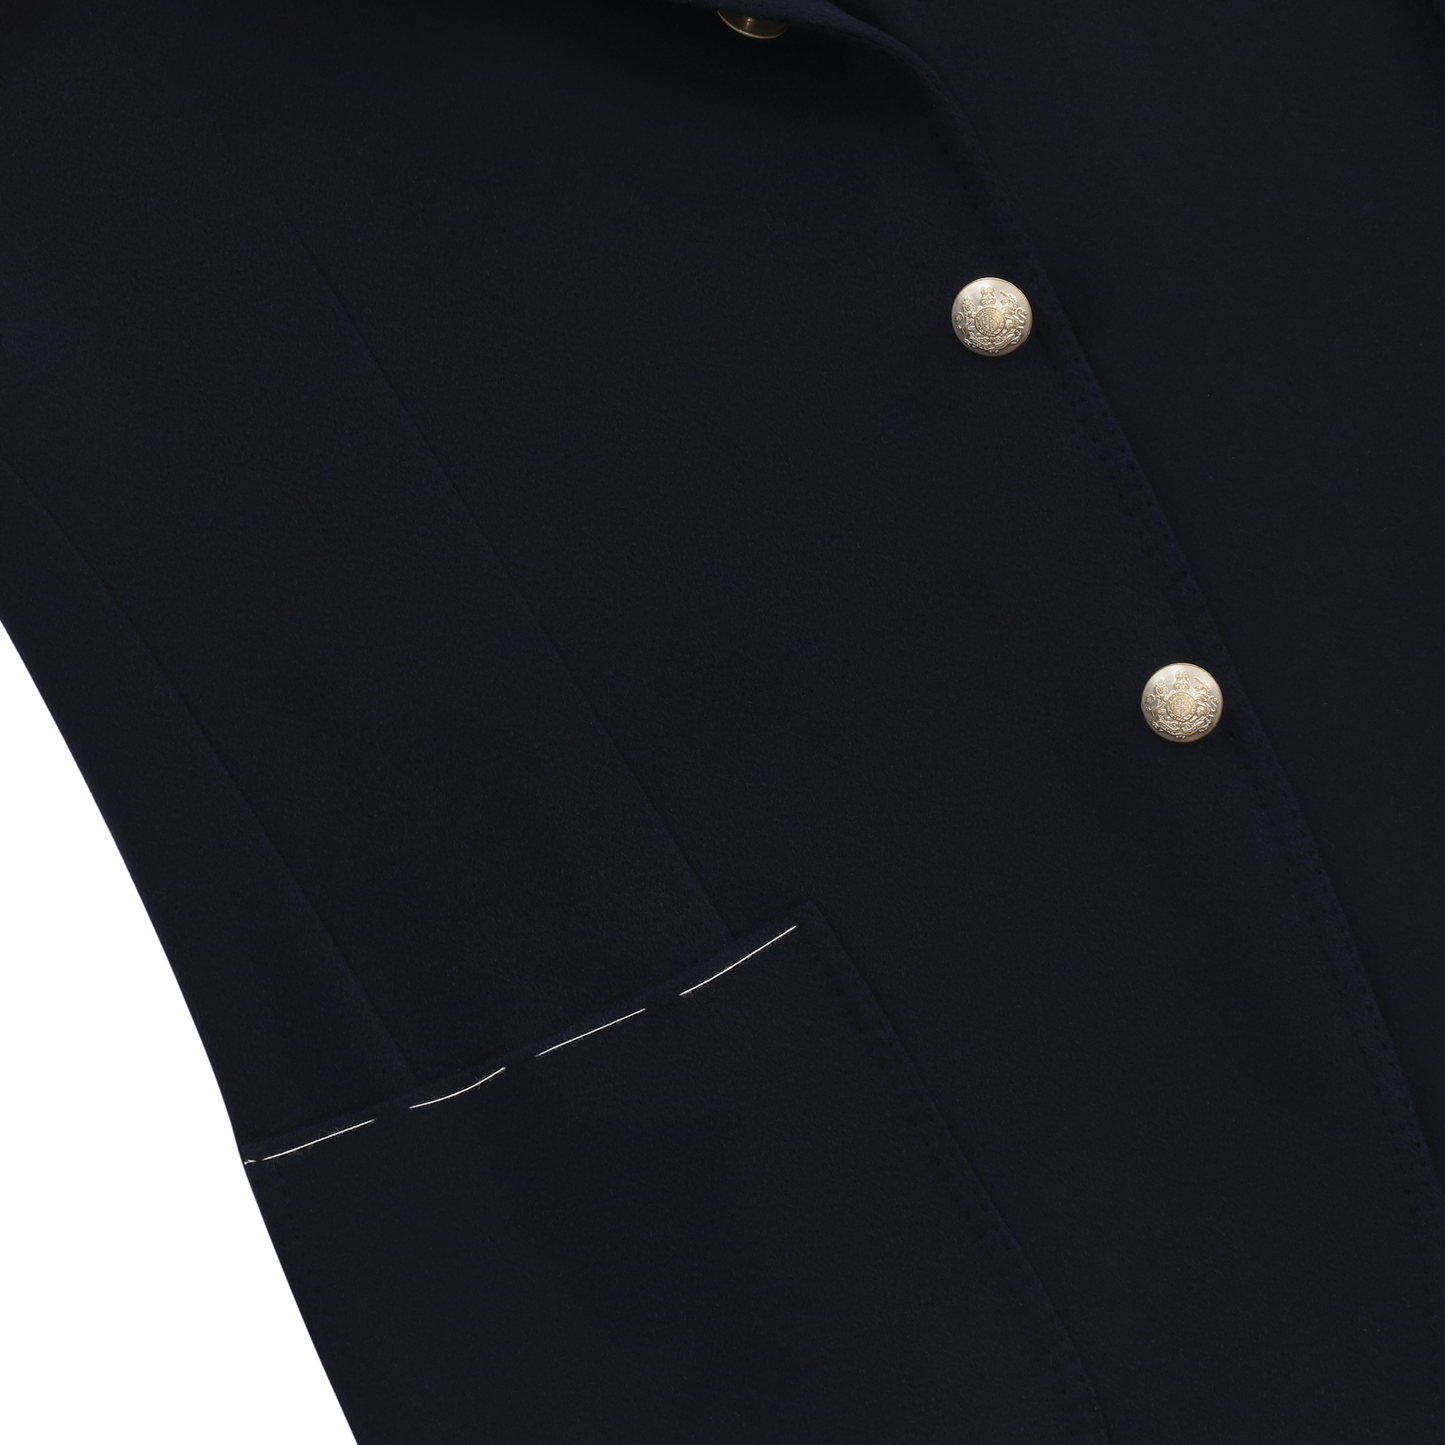 De Petrillo Single-Breasted Cashmere Club Jacket in Dark Blue. Exclusively Made for Sartale - SARTALE